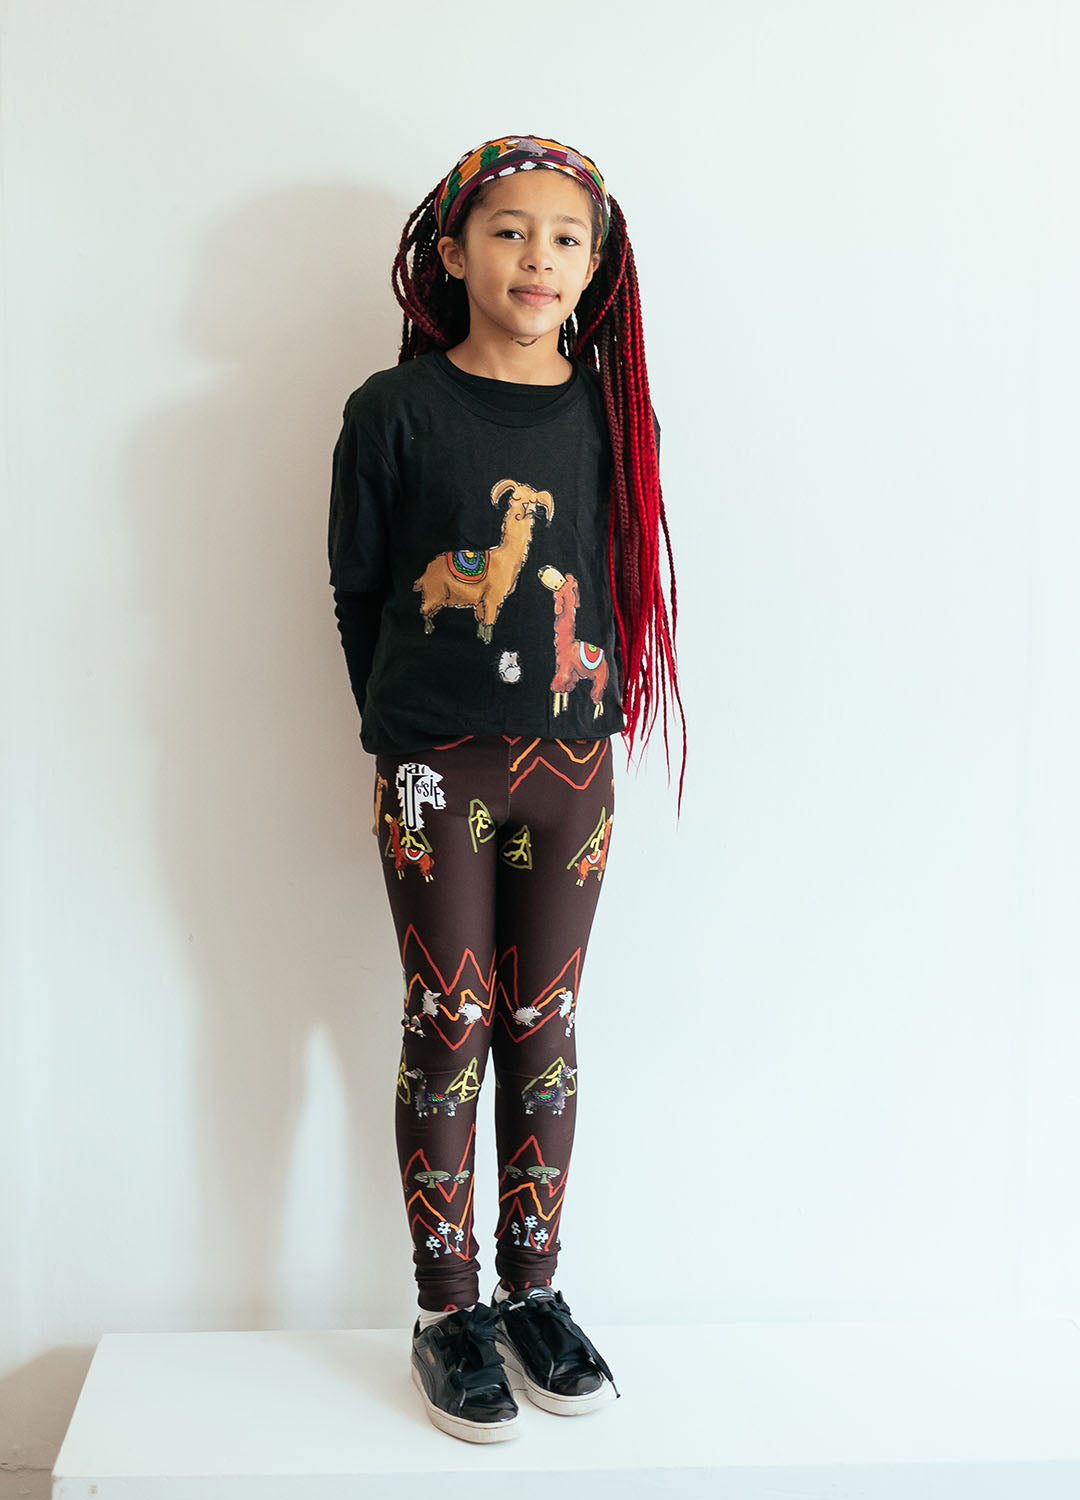 Llama Leggings (a.k.a. forest adventurers and mountain explorers